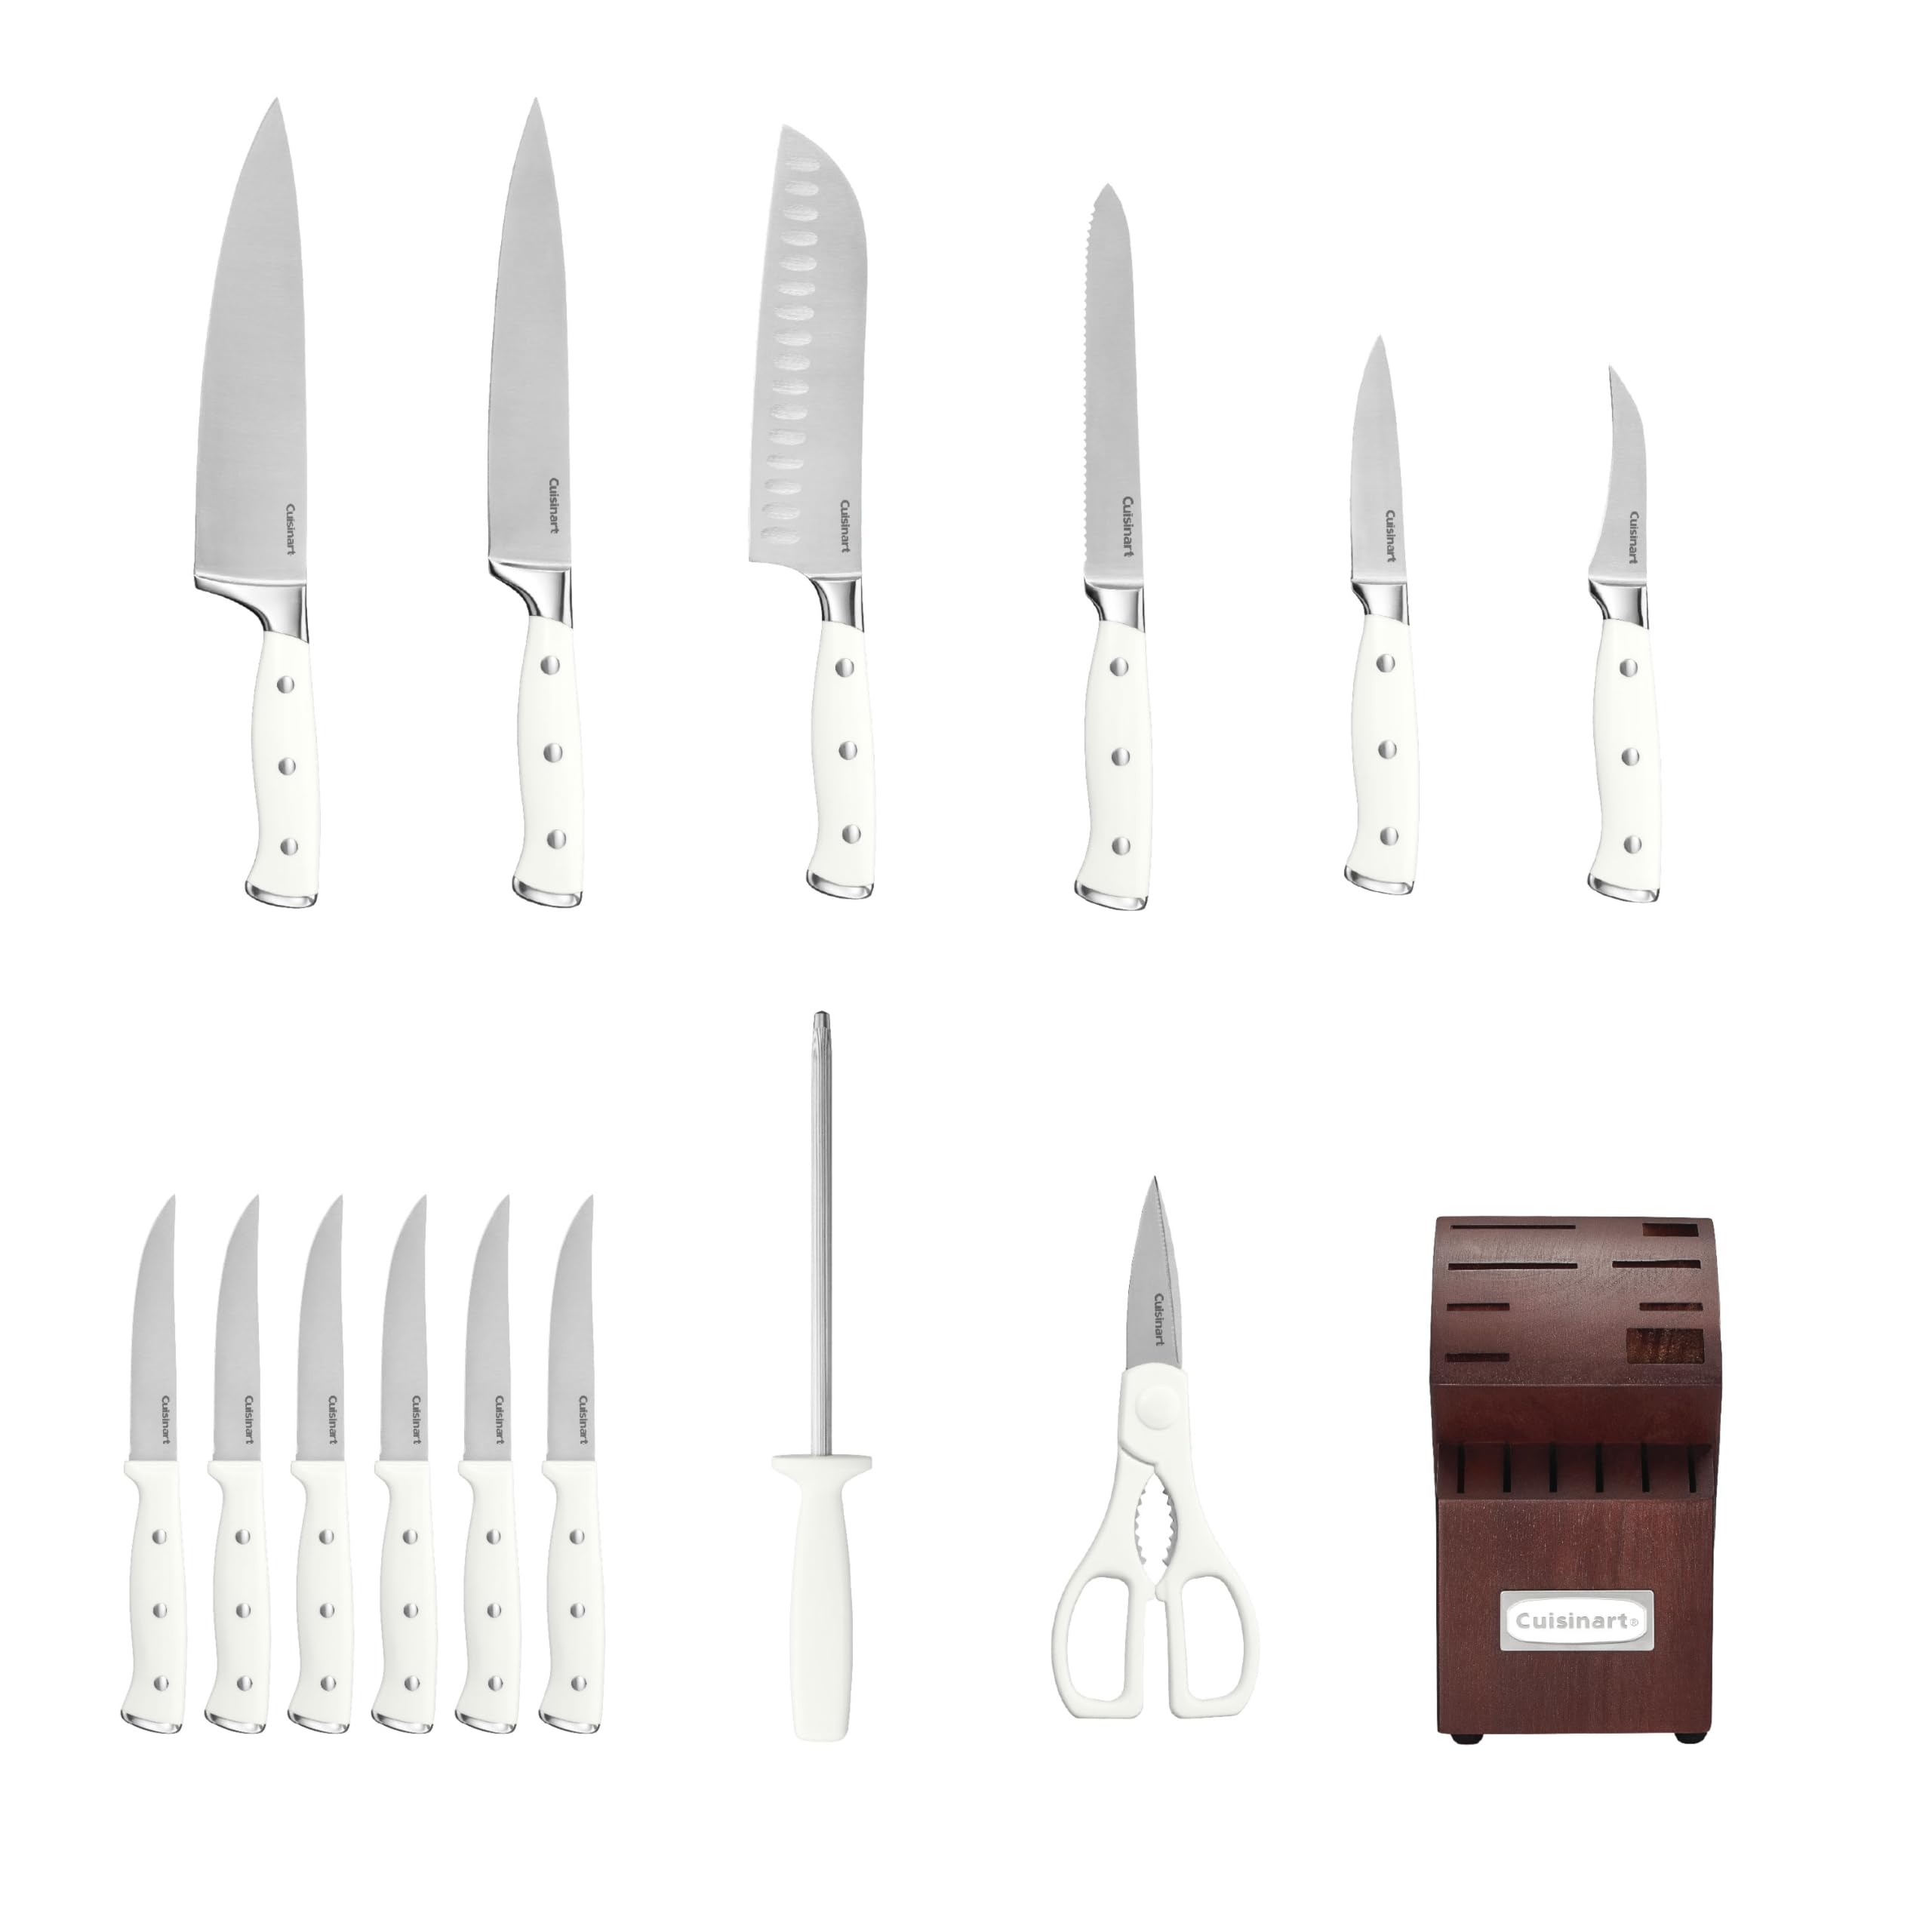 Cuisinart Classic Forged Triple Rivet, 15-Piece Knife Set with Block, Superior High-Carbon Stainless Steel Blades for Precision and Accuracy (Brushed Cherry/White)